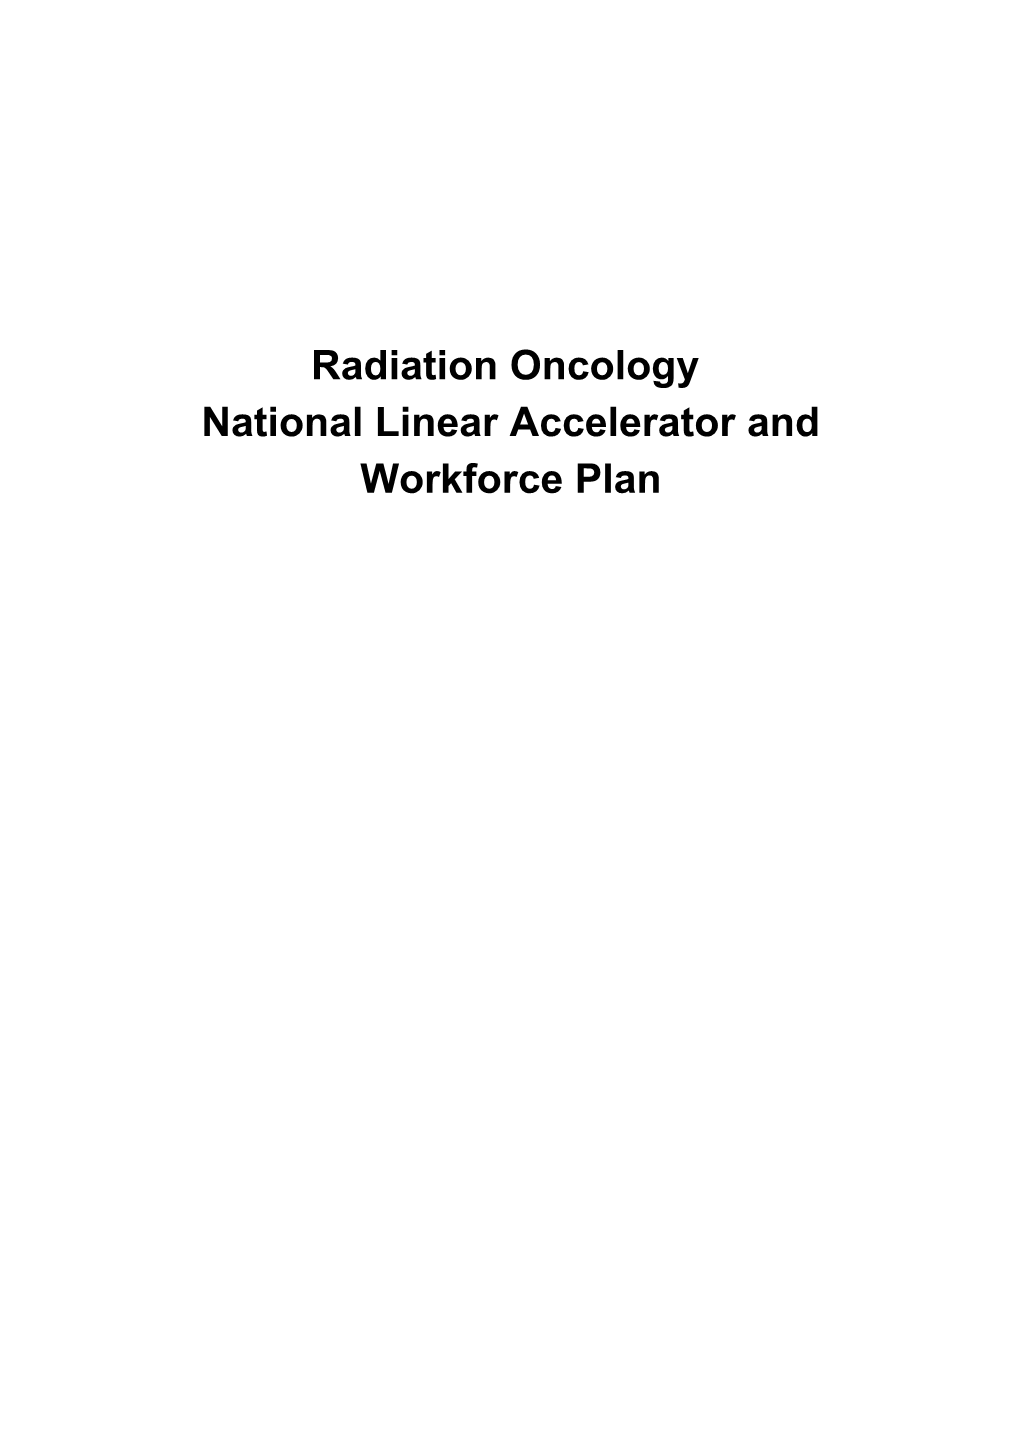 Radiation Oncology National Linear Accelerator and Workforce Plan